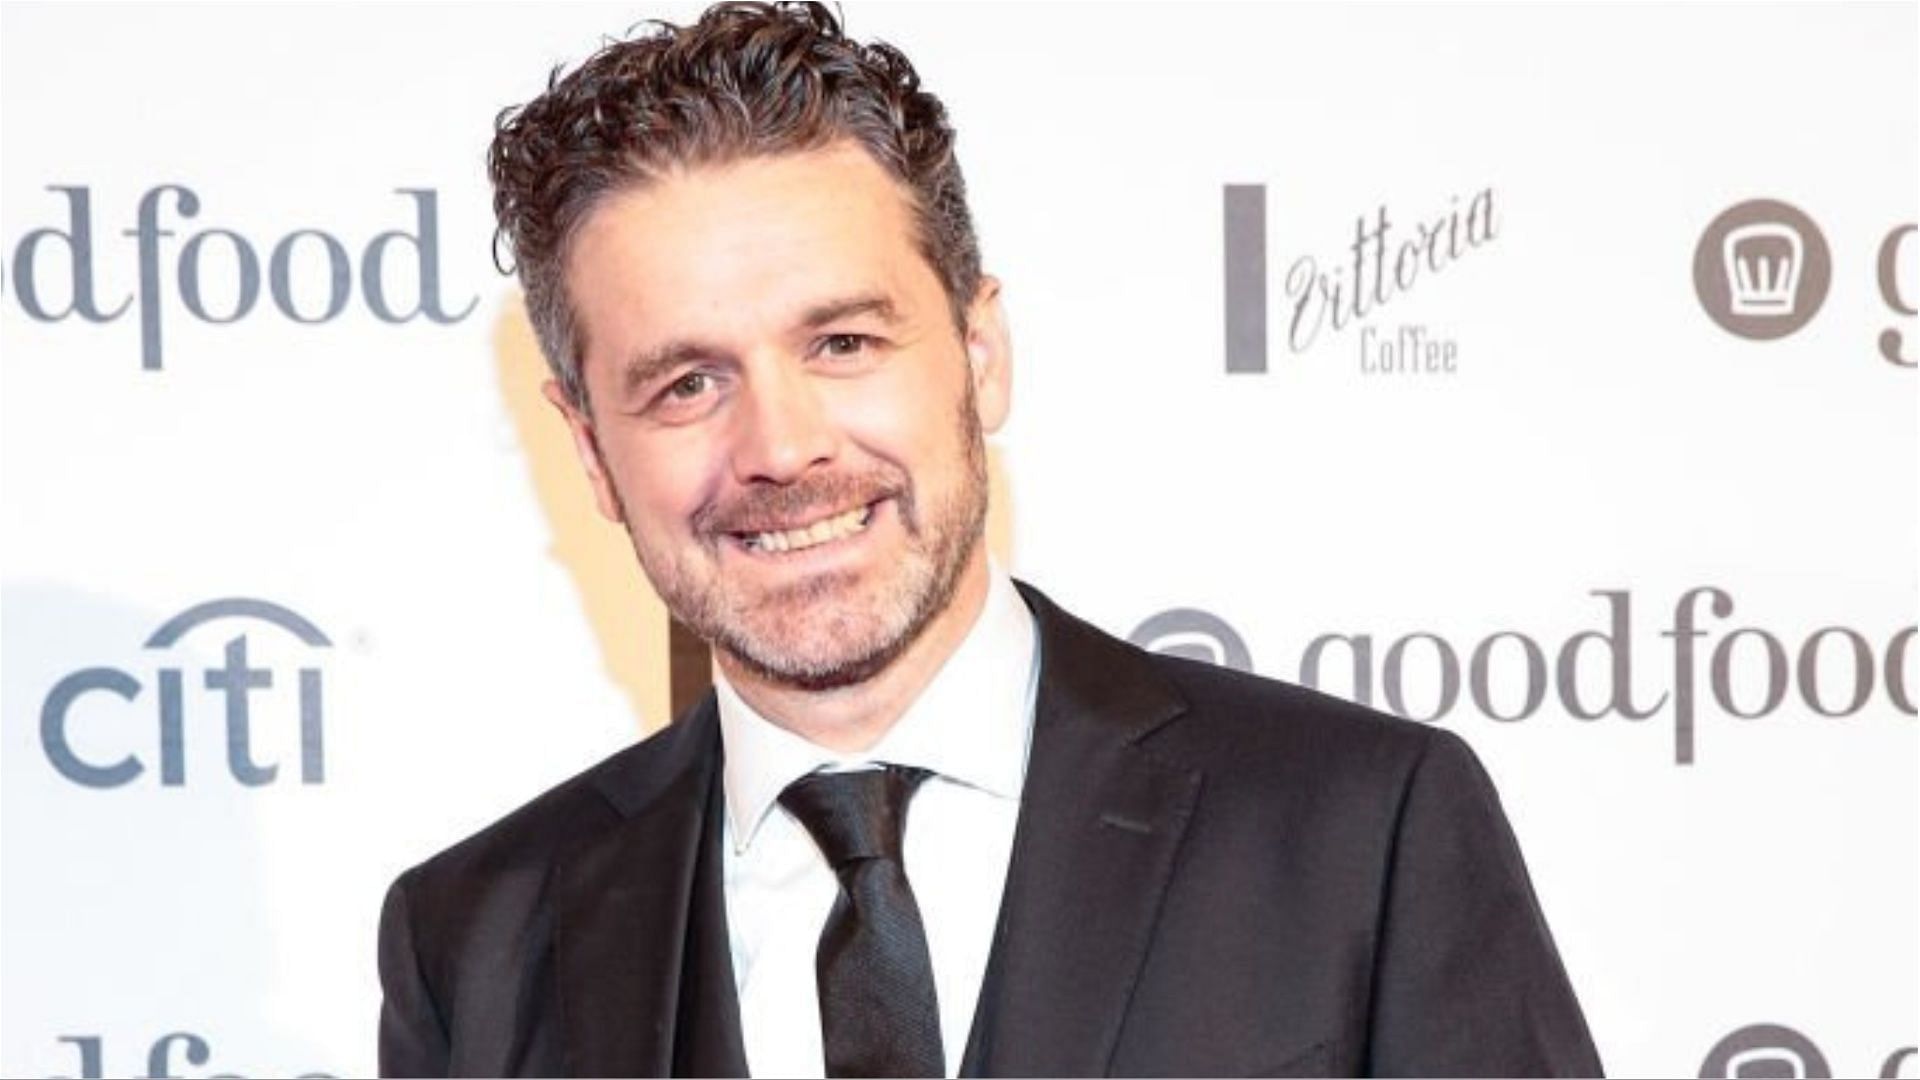 Jock Zonfrillo has hosted a few cooking shows (Image via Sam Tabone/Getty Images)